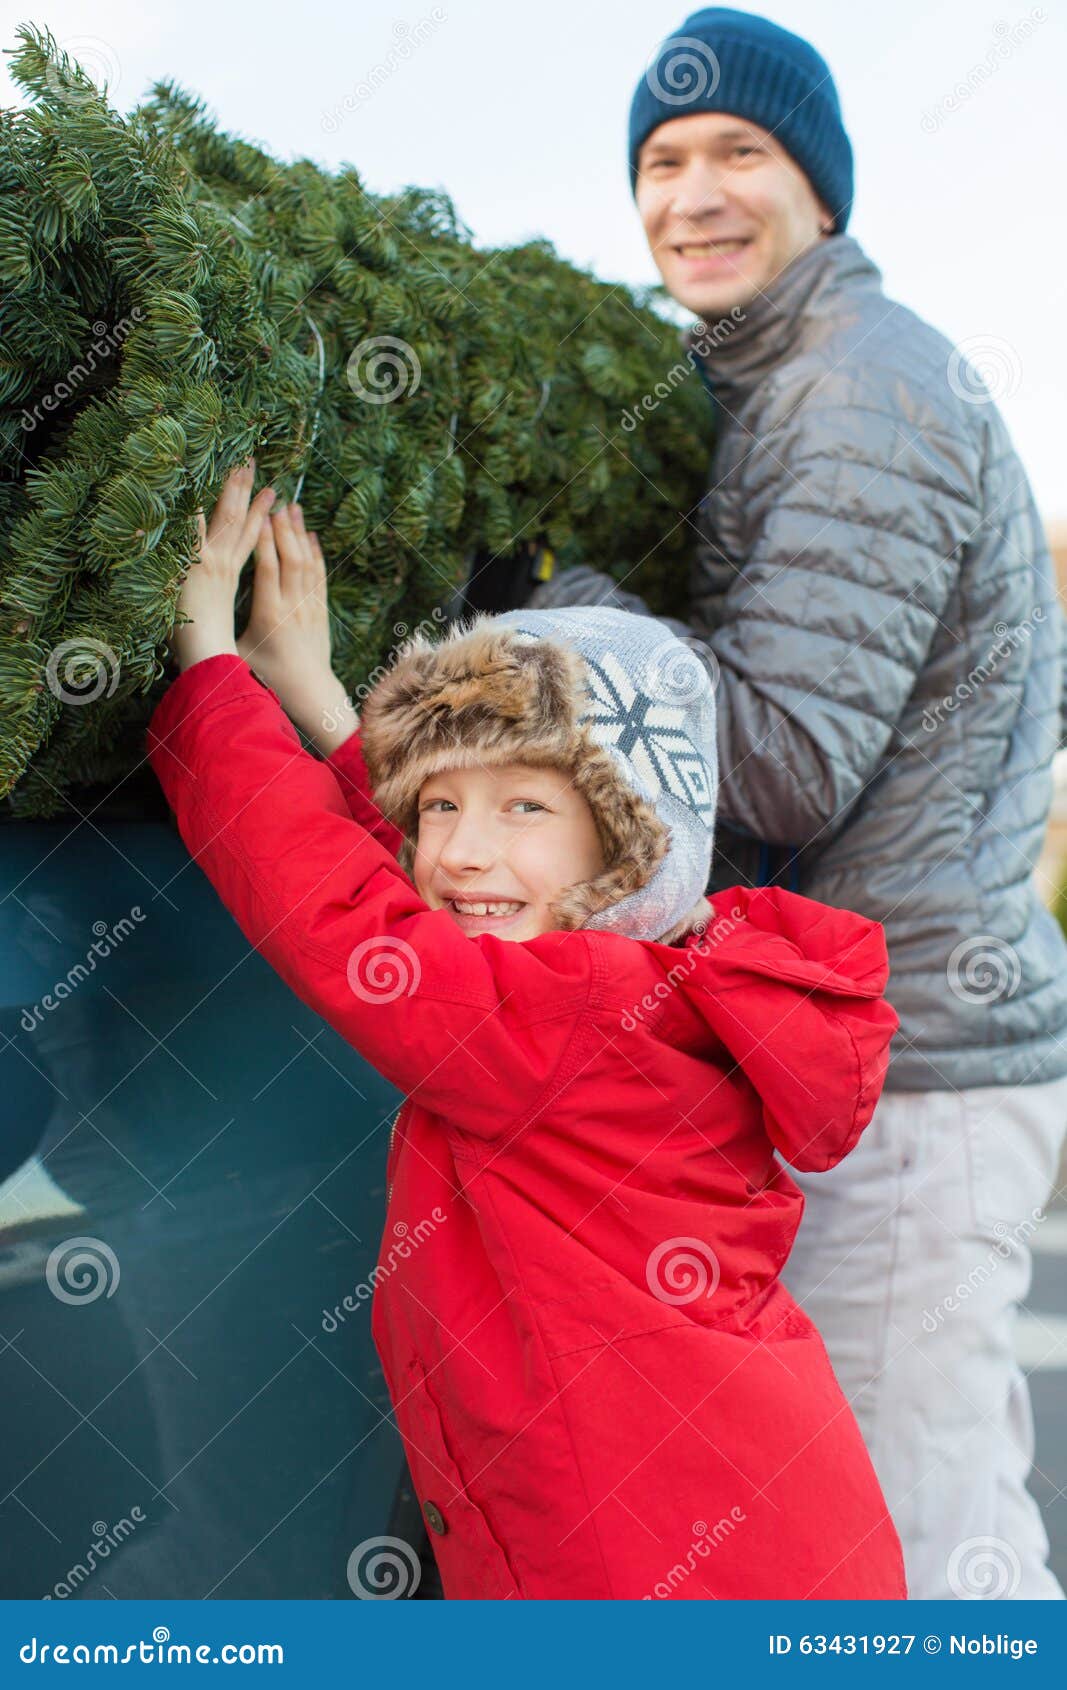 Family Buying Christmas Tree Stock Image - Image of cold, green: 63431927